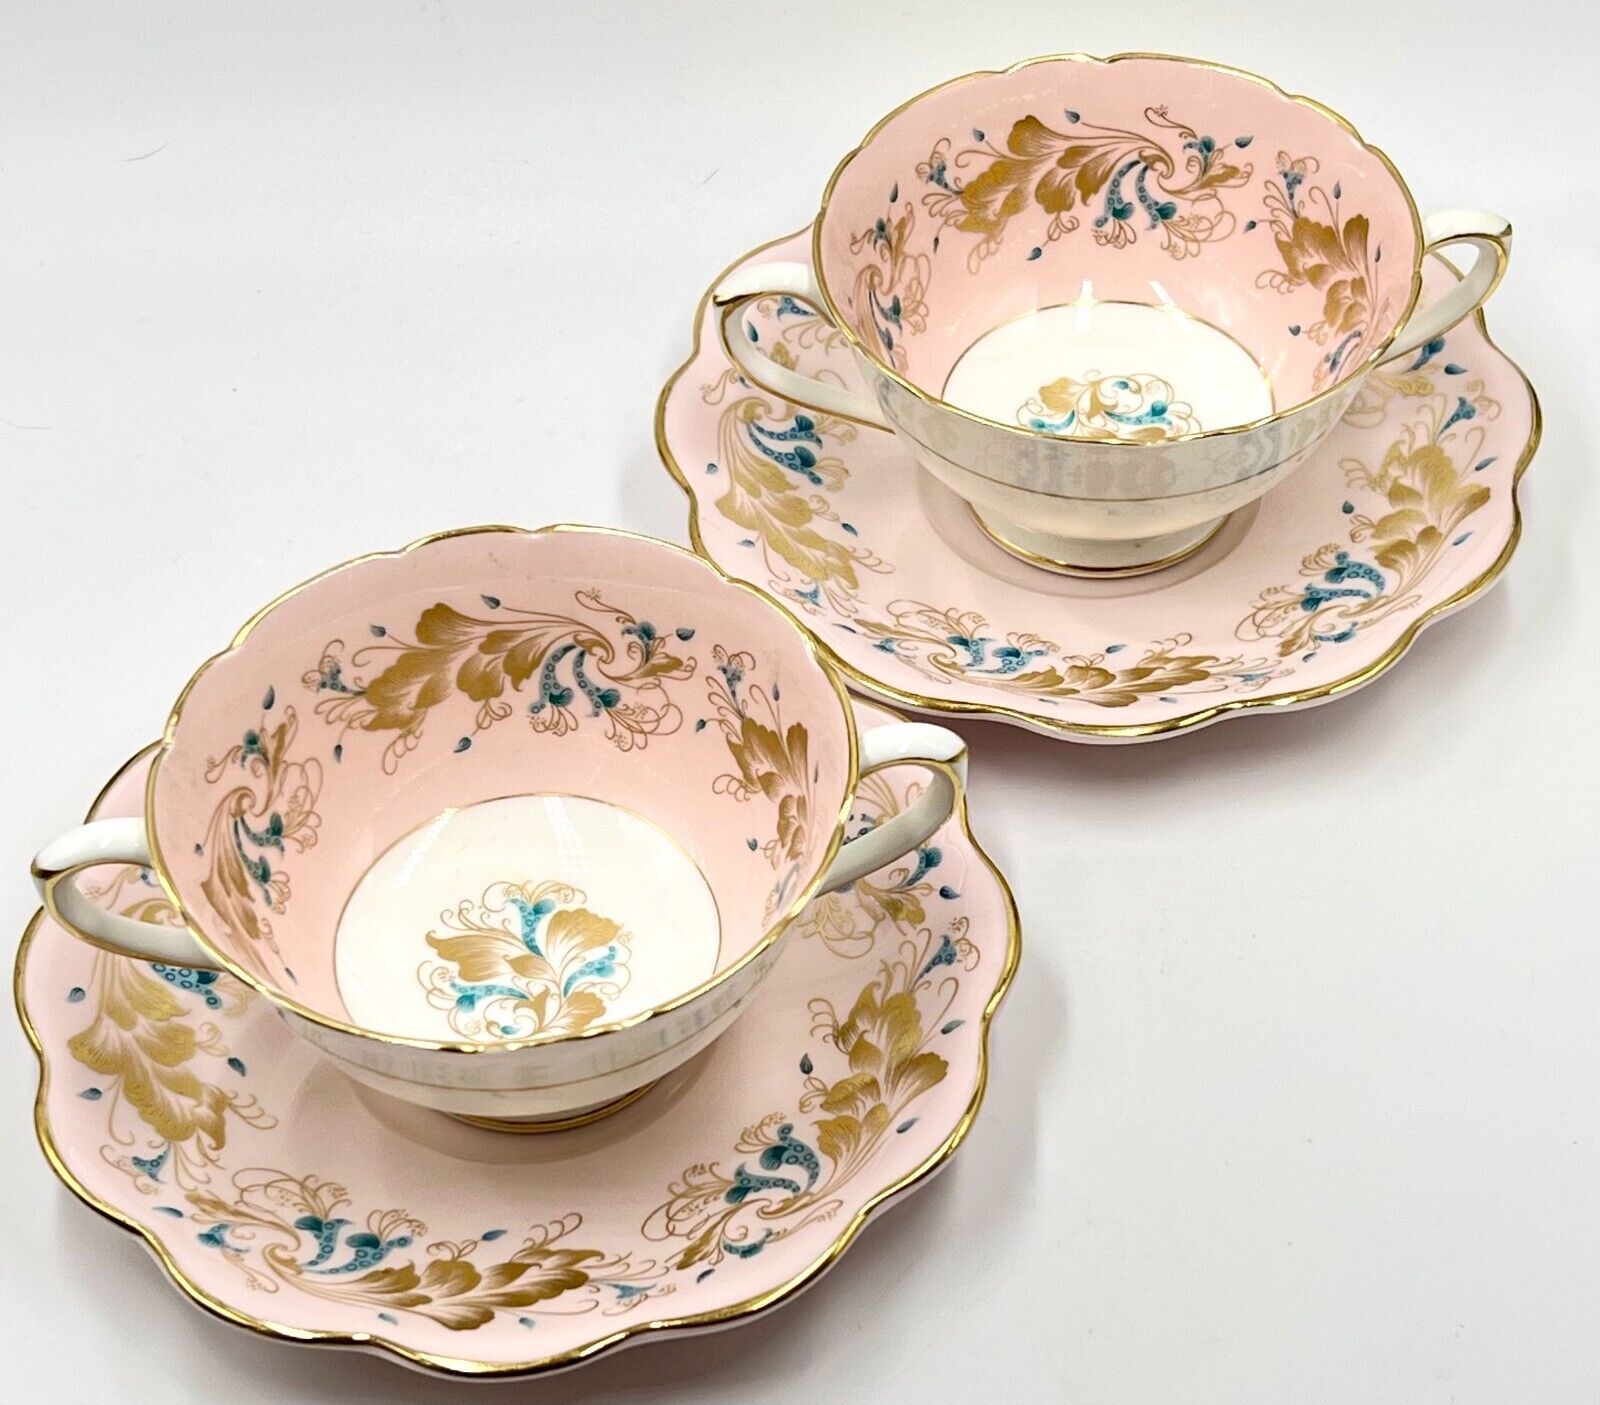 TWO LOVELY COALPORT ENGLAND PINK CREAM SOUP CUPS & SAUCERS, STRANGE ORCHID